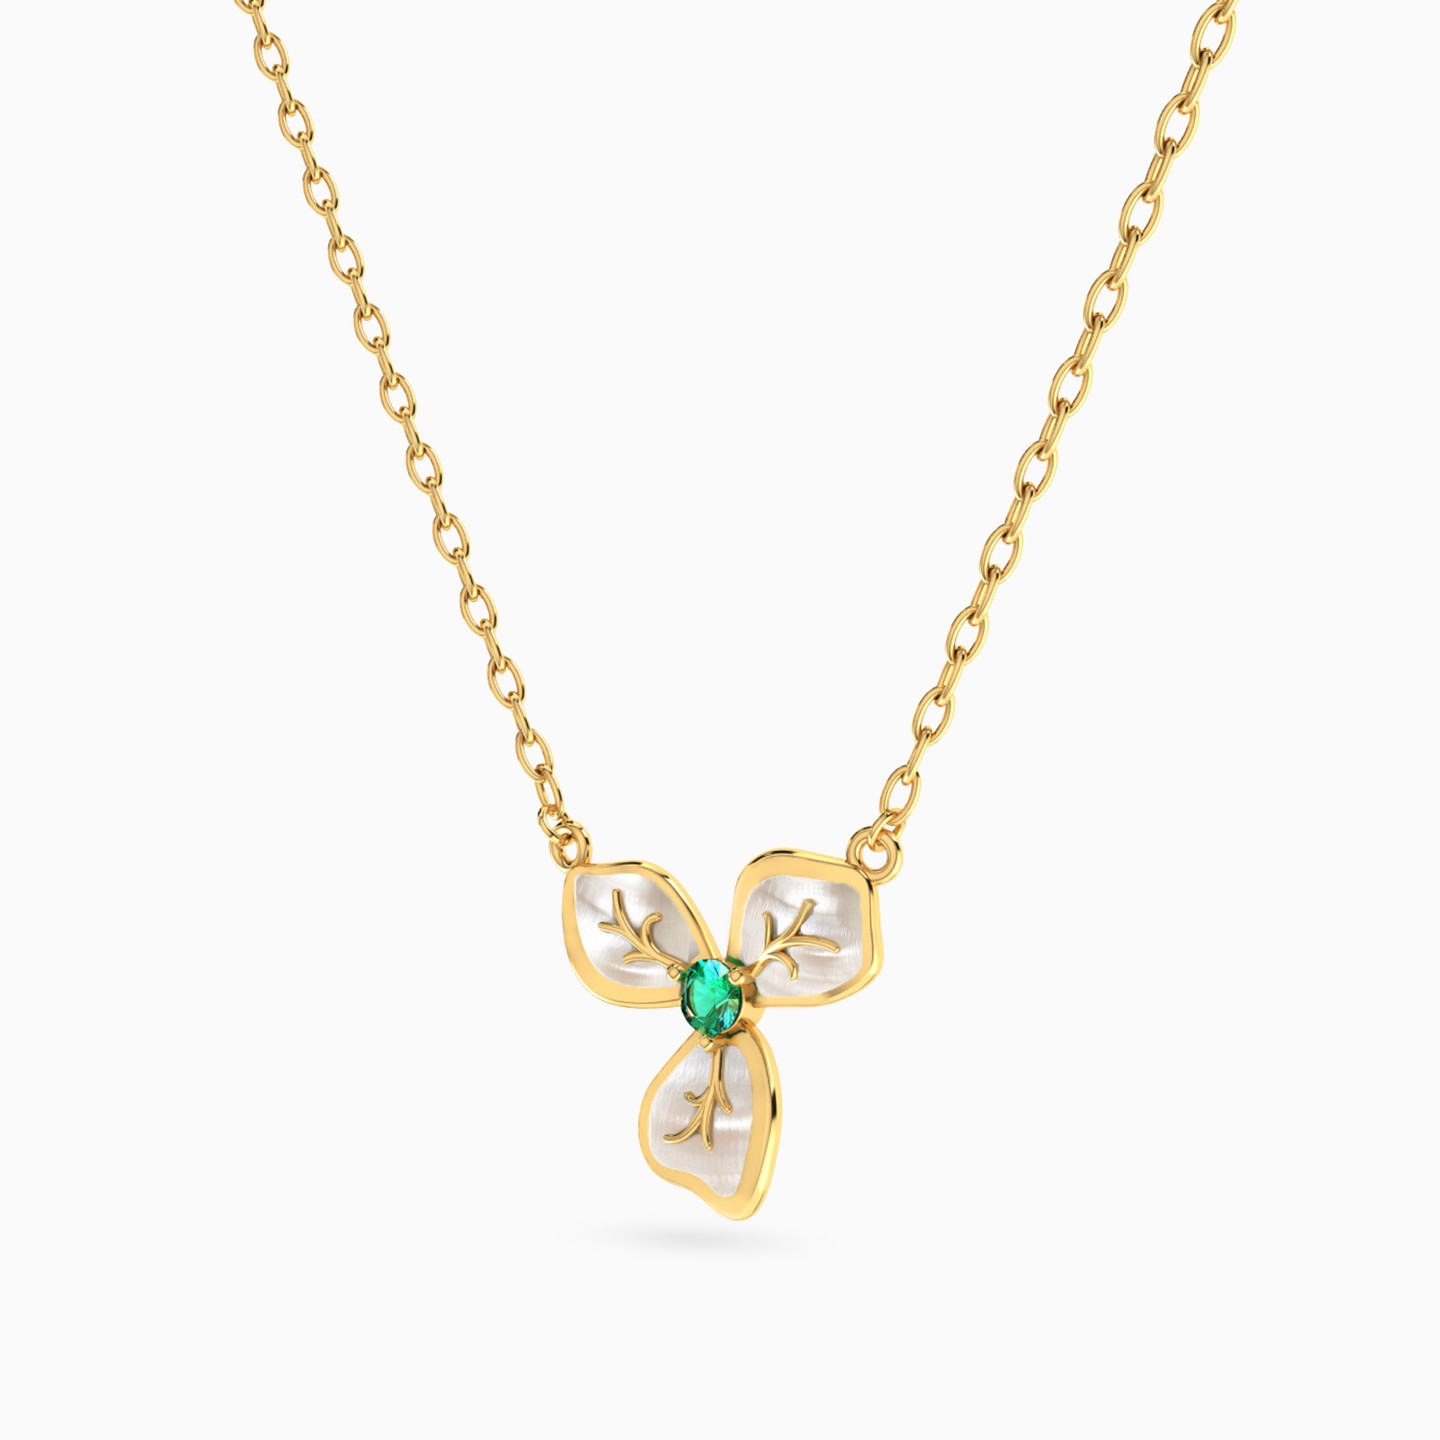 Flower Shaped Colored Stones Pendant with 18K Gold Chain - 2